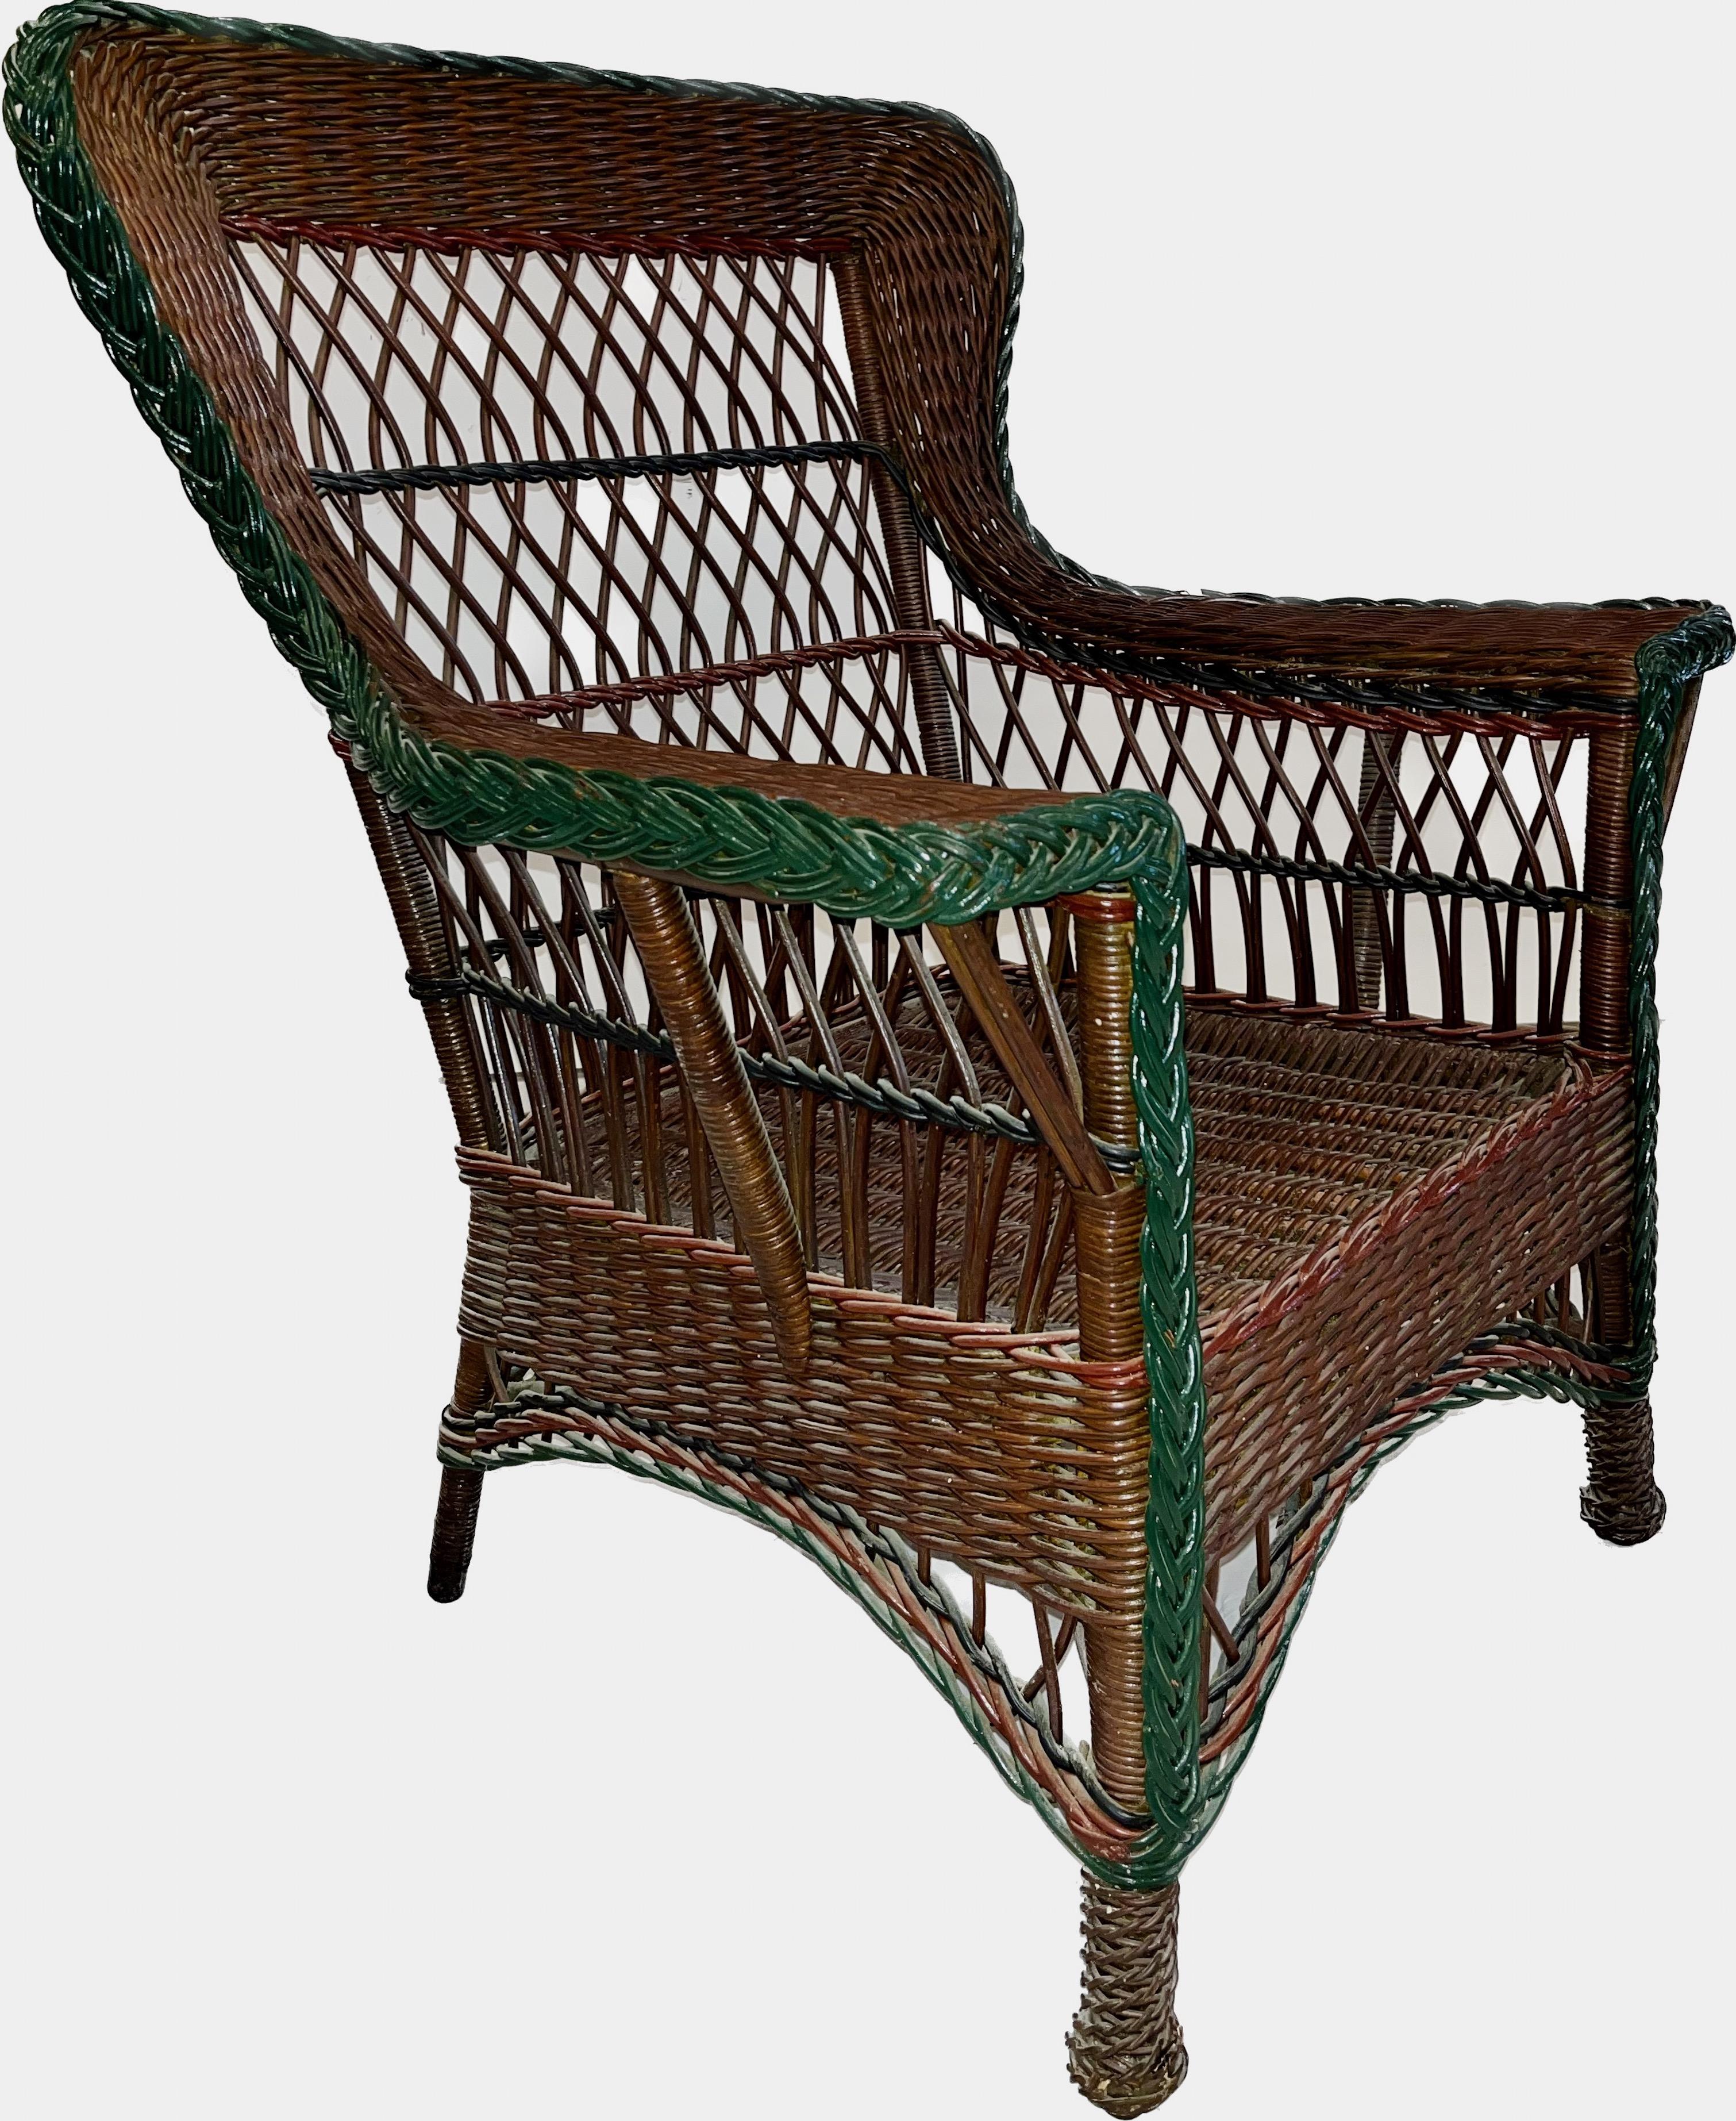 Antique Bar Harbor Style Wicker Wing Chair in Natural Finish with Green Trim For Sale 3